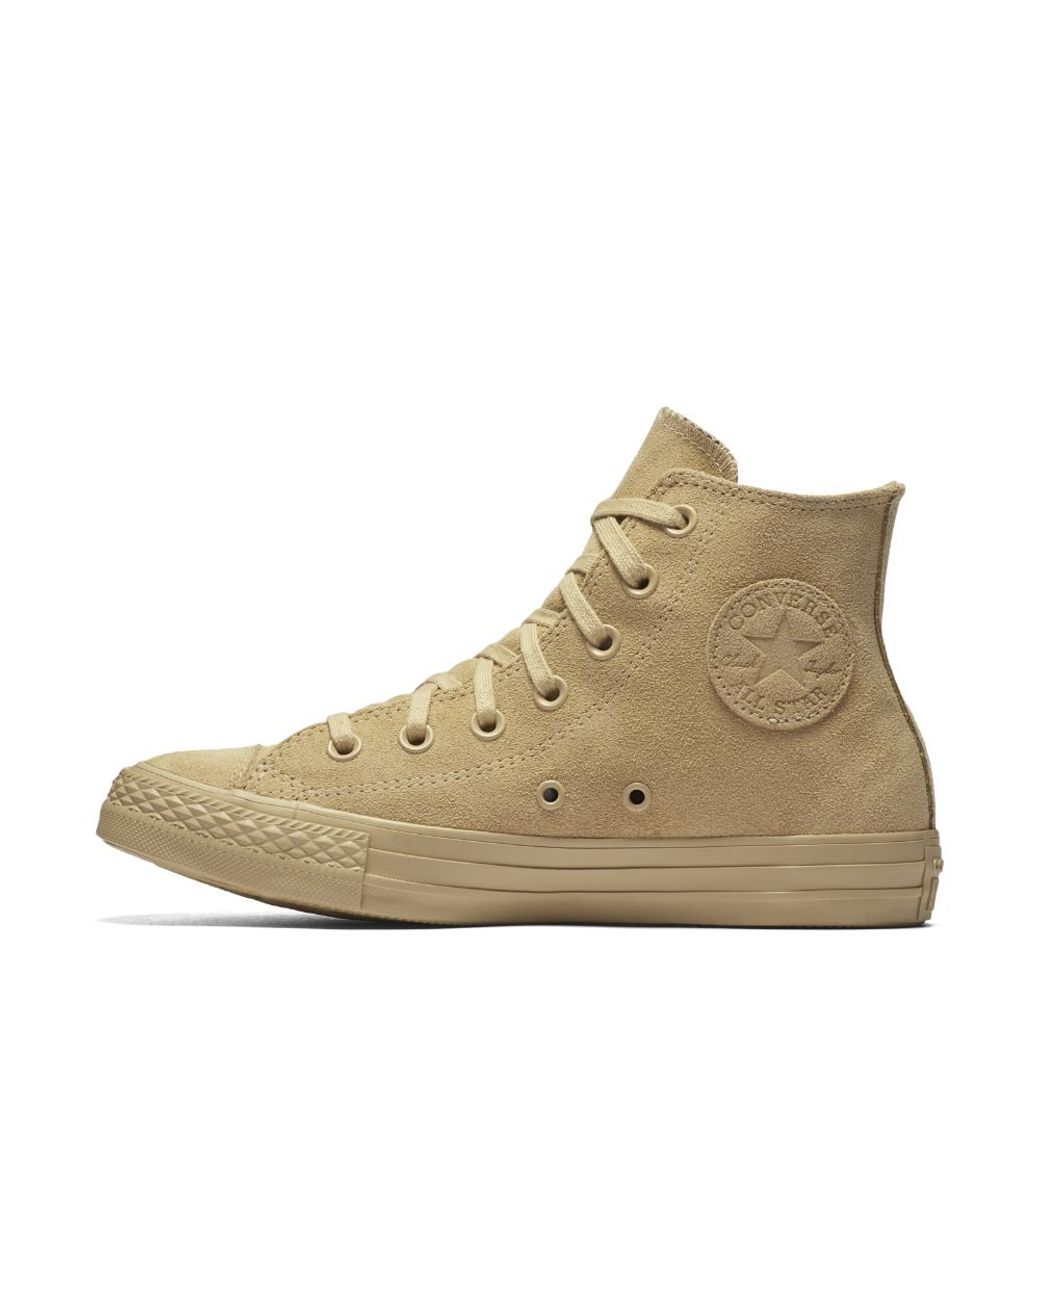 Converse Chuck Taylor All Star Mono Suede High Top Women's Shoe in Natural  | Lyst